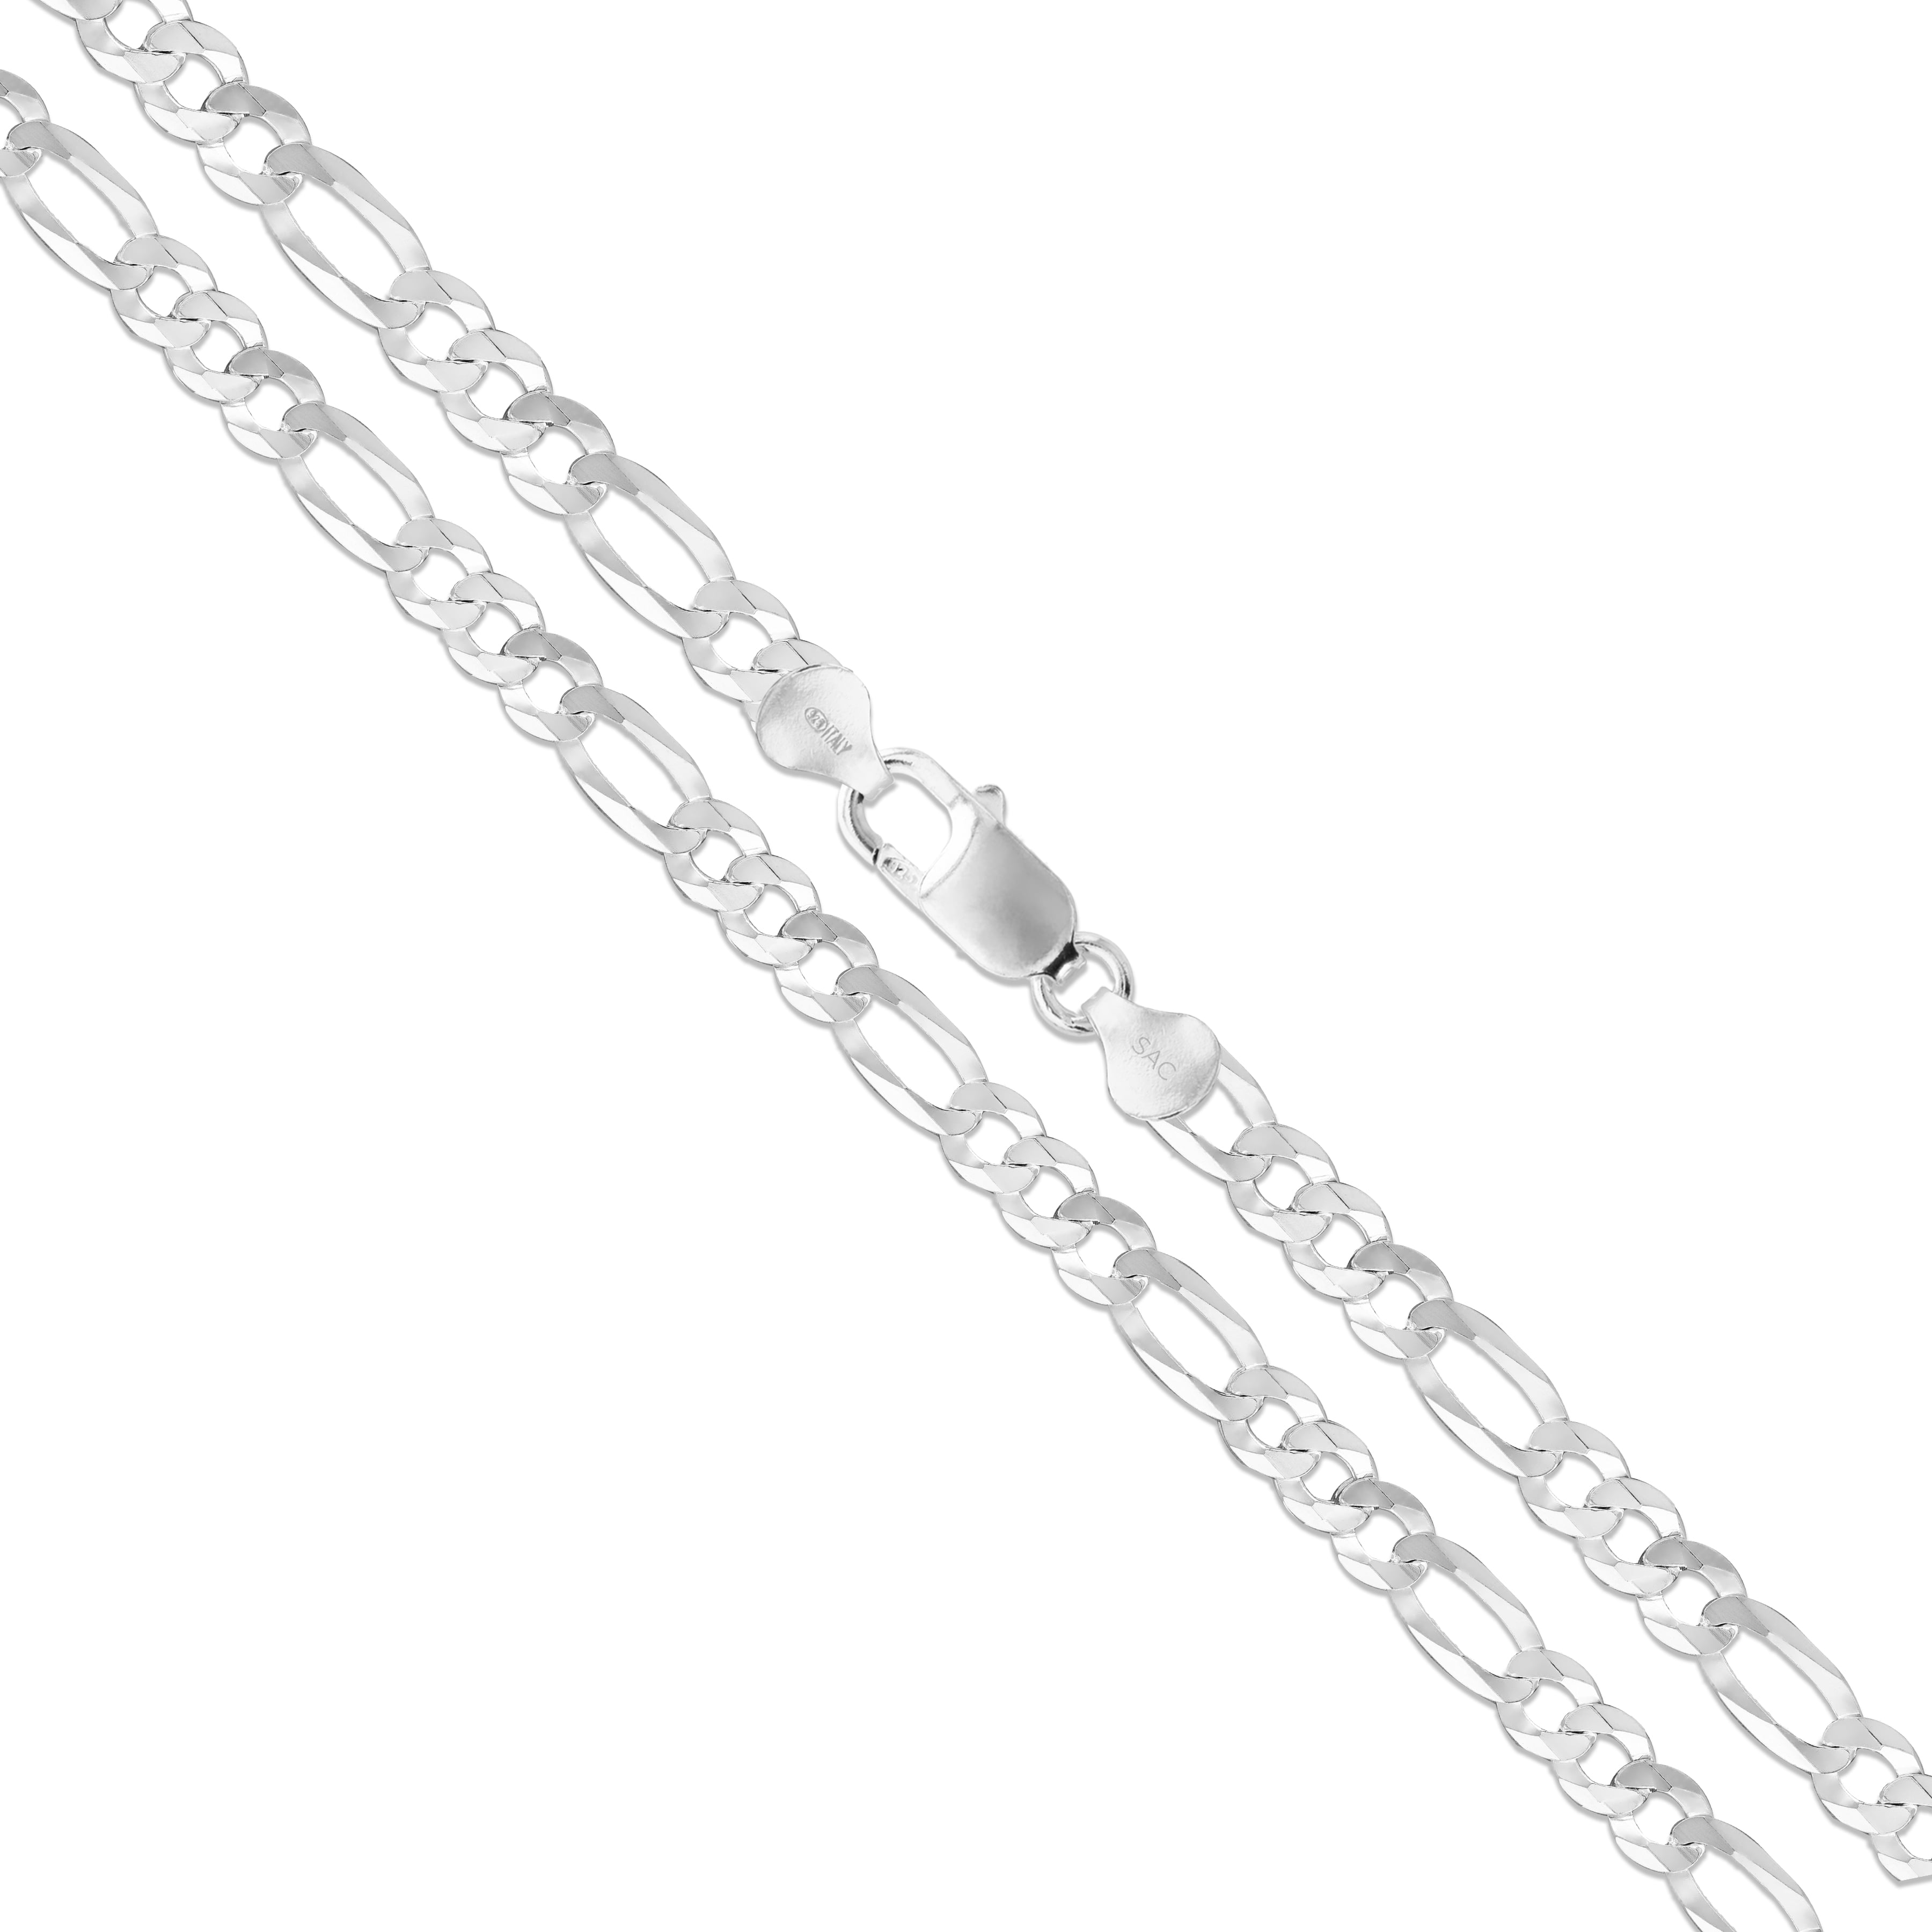 Wholesale 925 Gold Silver Figaro Curb Link Flat Chain Necklace Jewelry 16''-30''